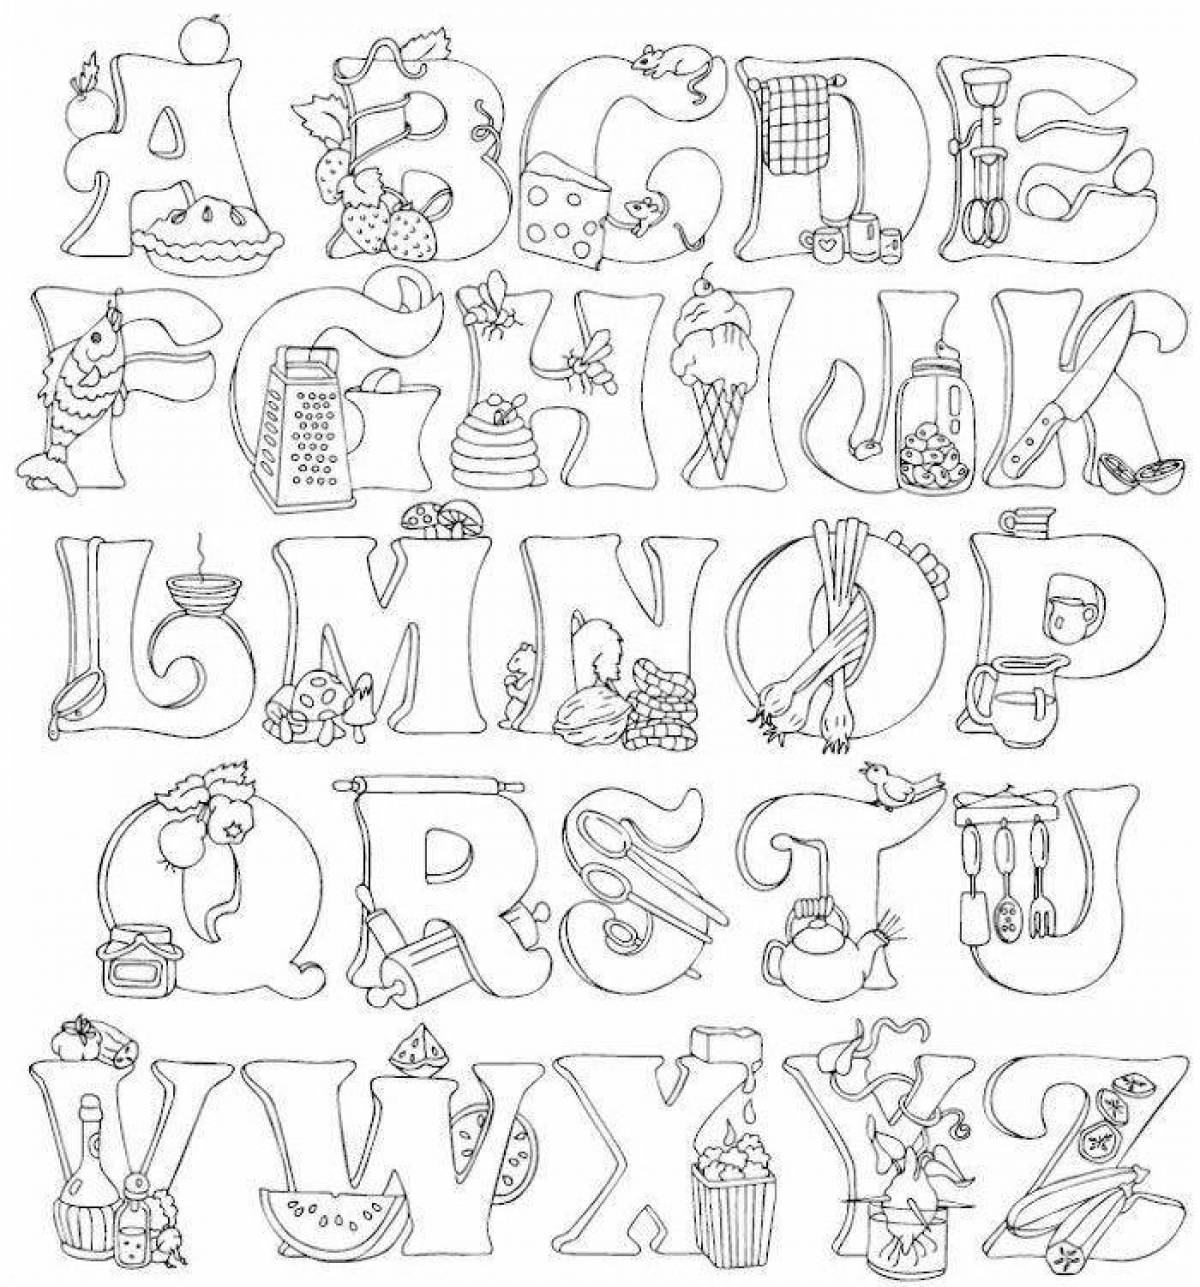 Colorful and playful alphabet knowledge coloring page